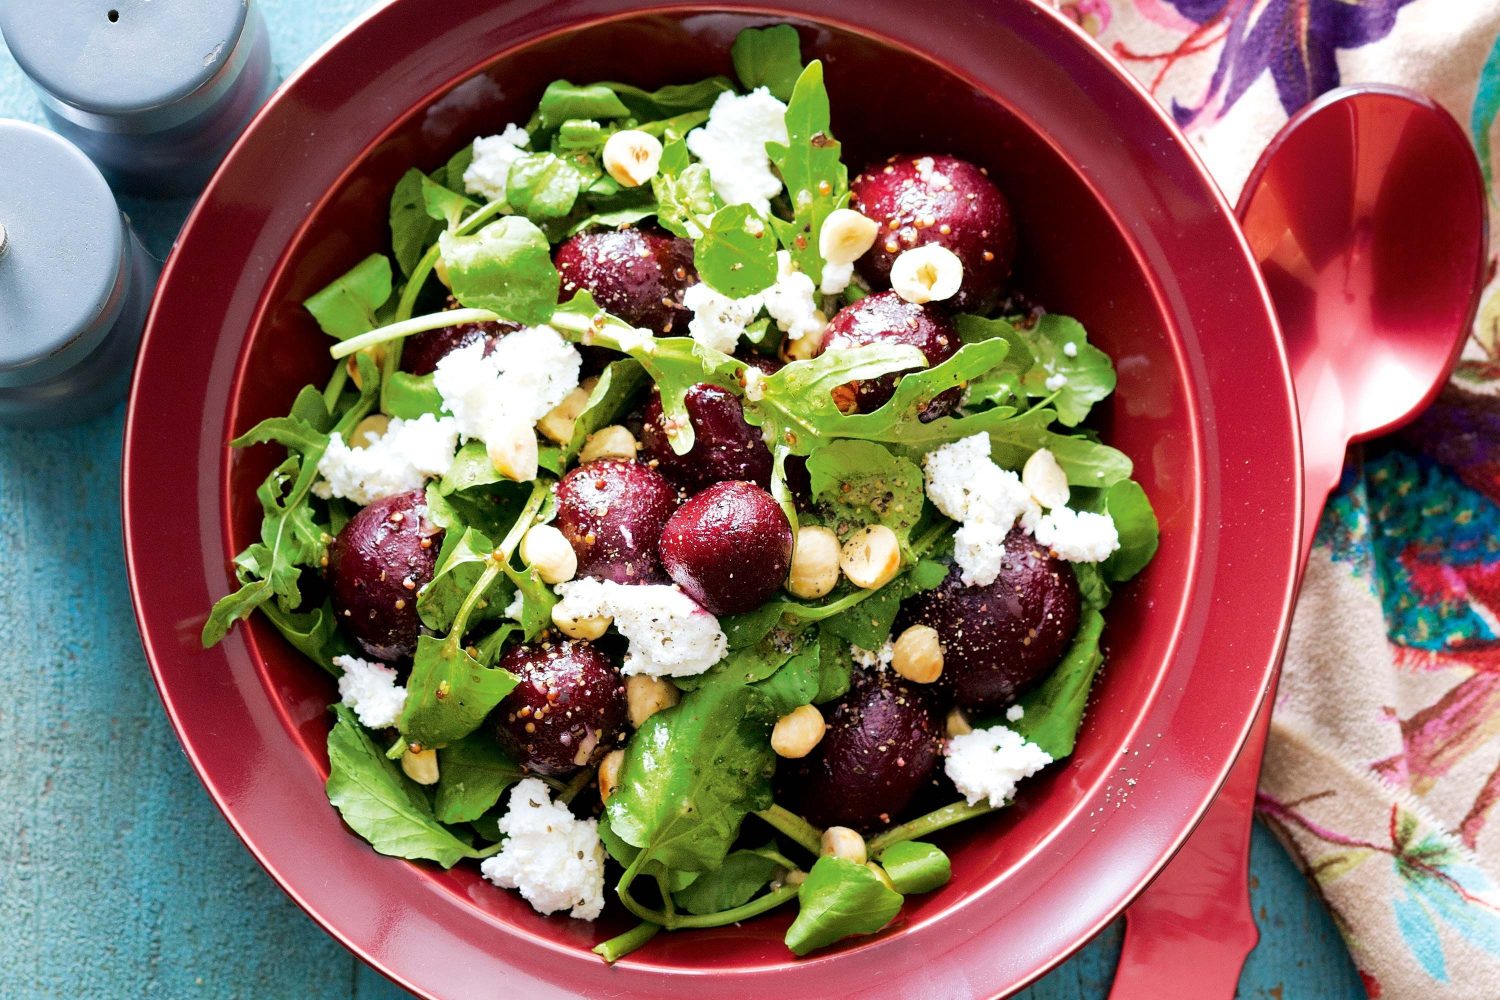 These Are the 🥑 Healthiest Foods in the Human Diet, According to AI. 🍄 How Many Have You Been Eating? beetroot watercress and goats cheese salad 91583 1